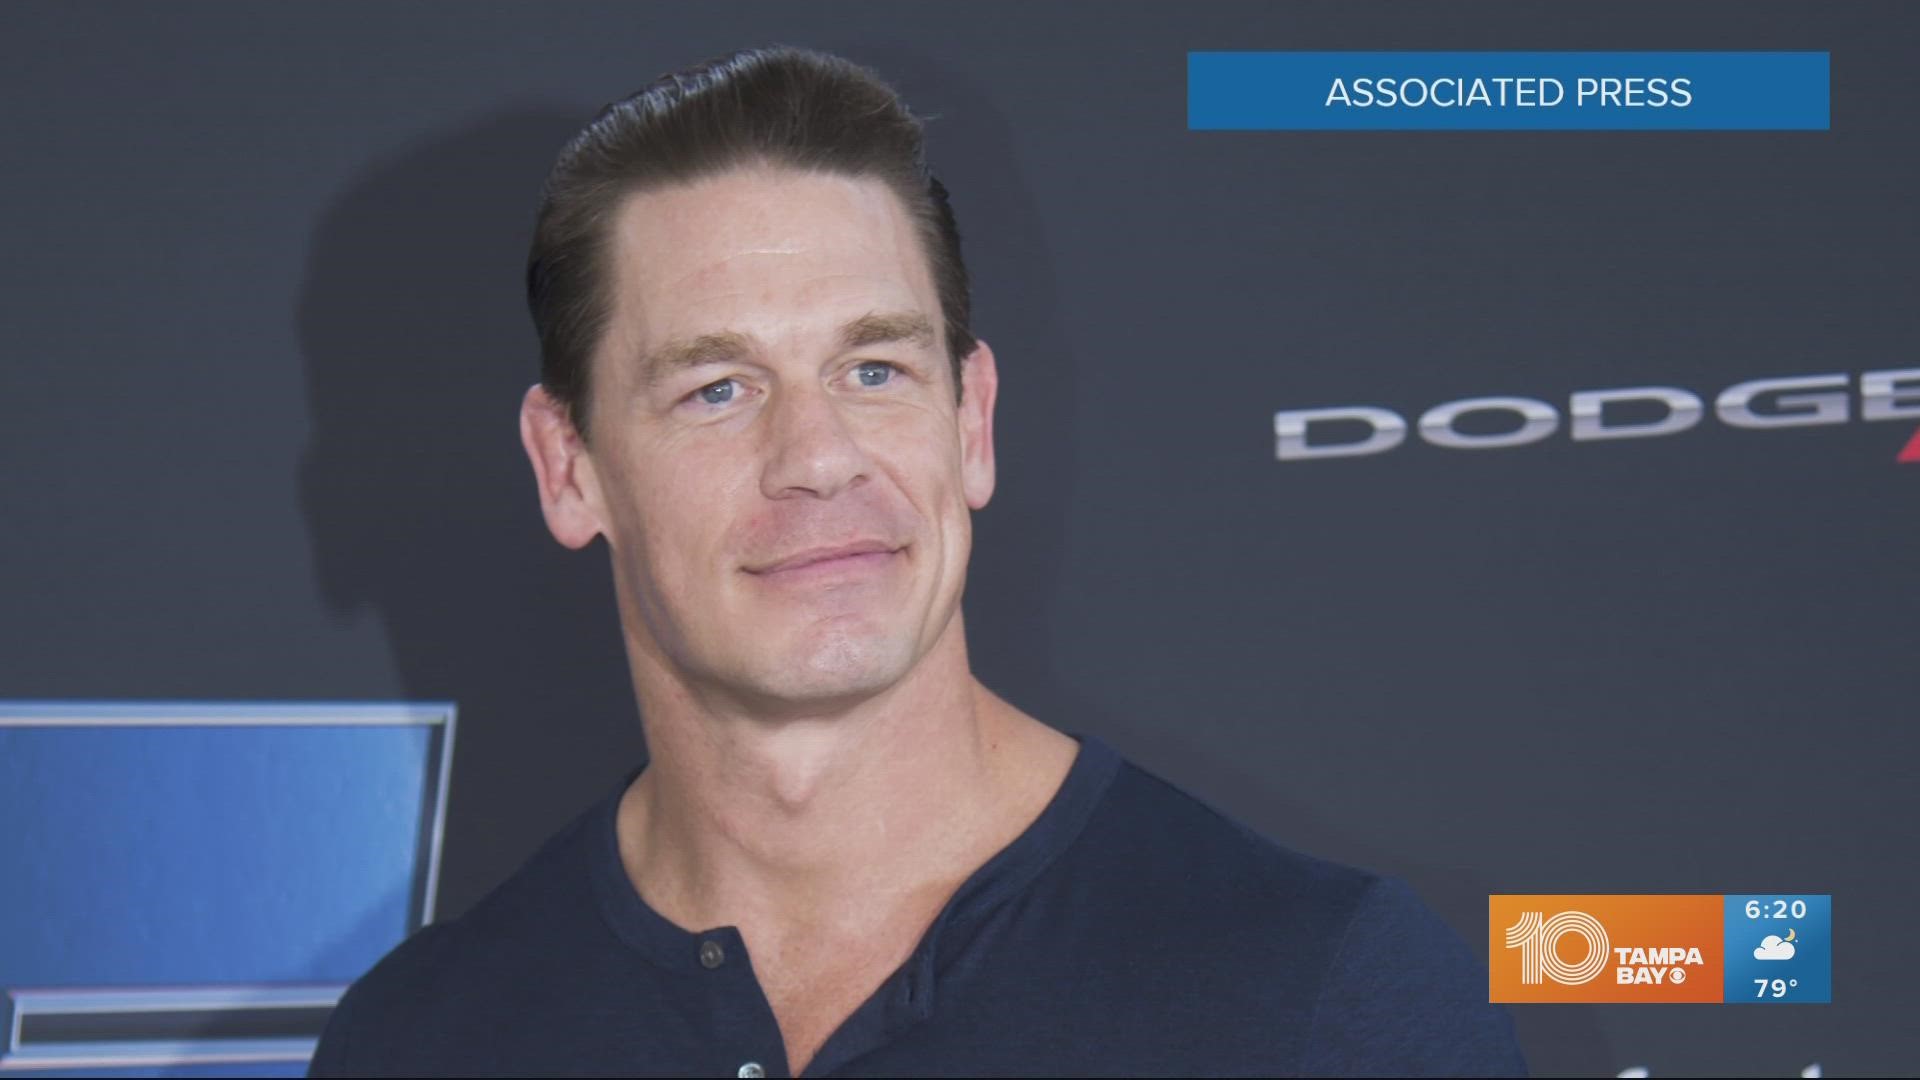 The WWE wrestler-turned-Hollywood actor has granted more than 600 wishes for Make-A-Wish kids.